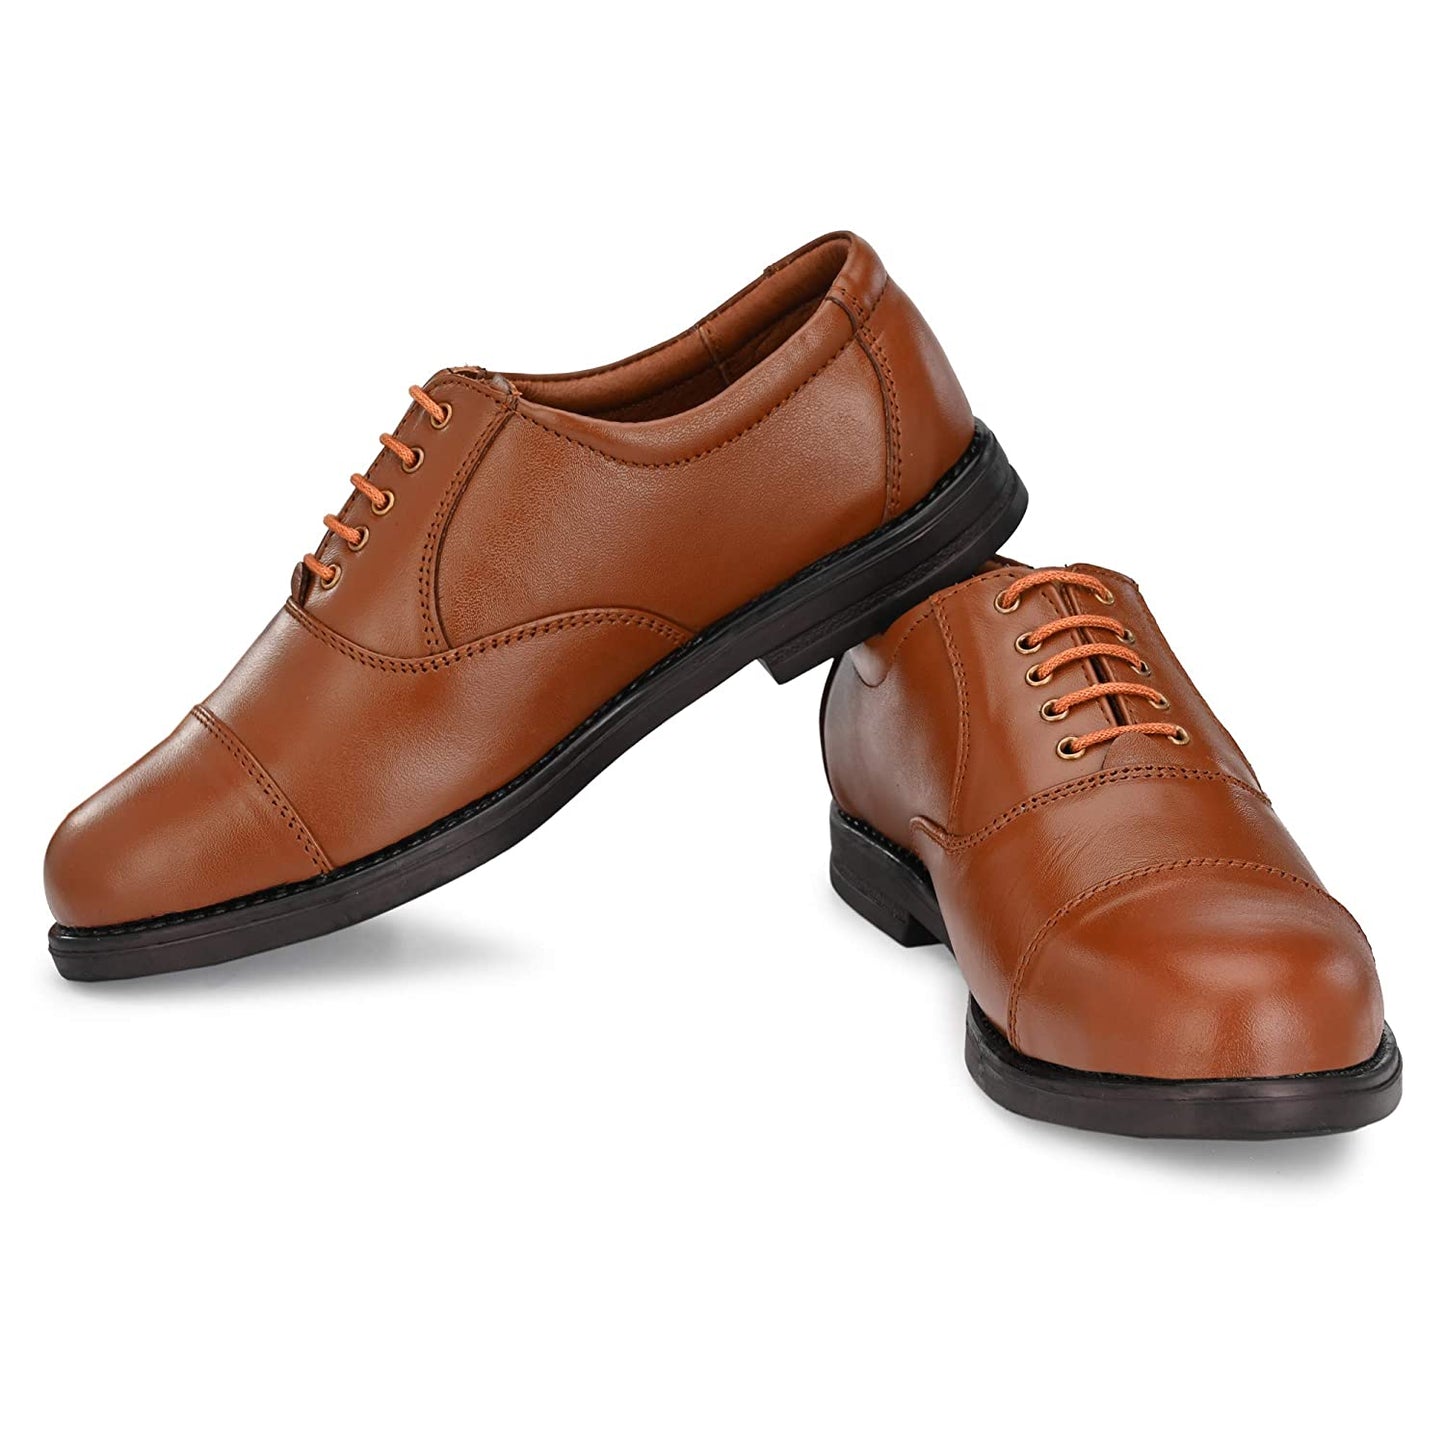 Leather Police Shoes